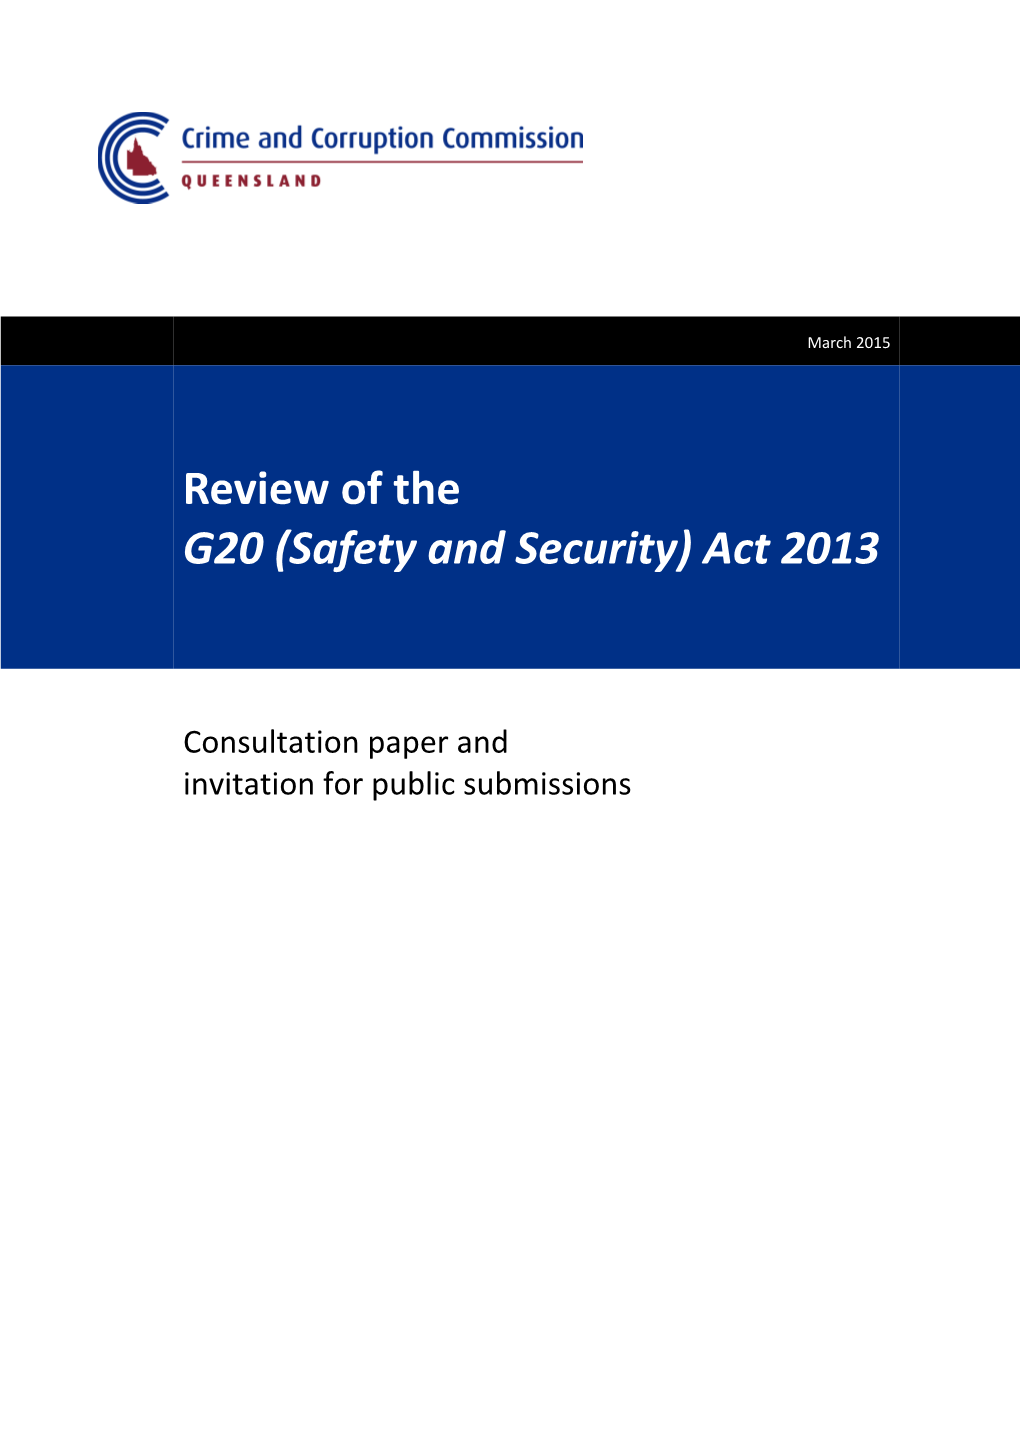 Review of the G20 (Safety and Security) Act 2013: Consultation Paper and Invitation For